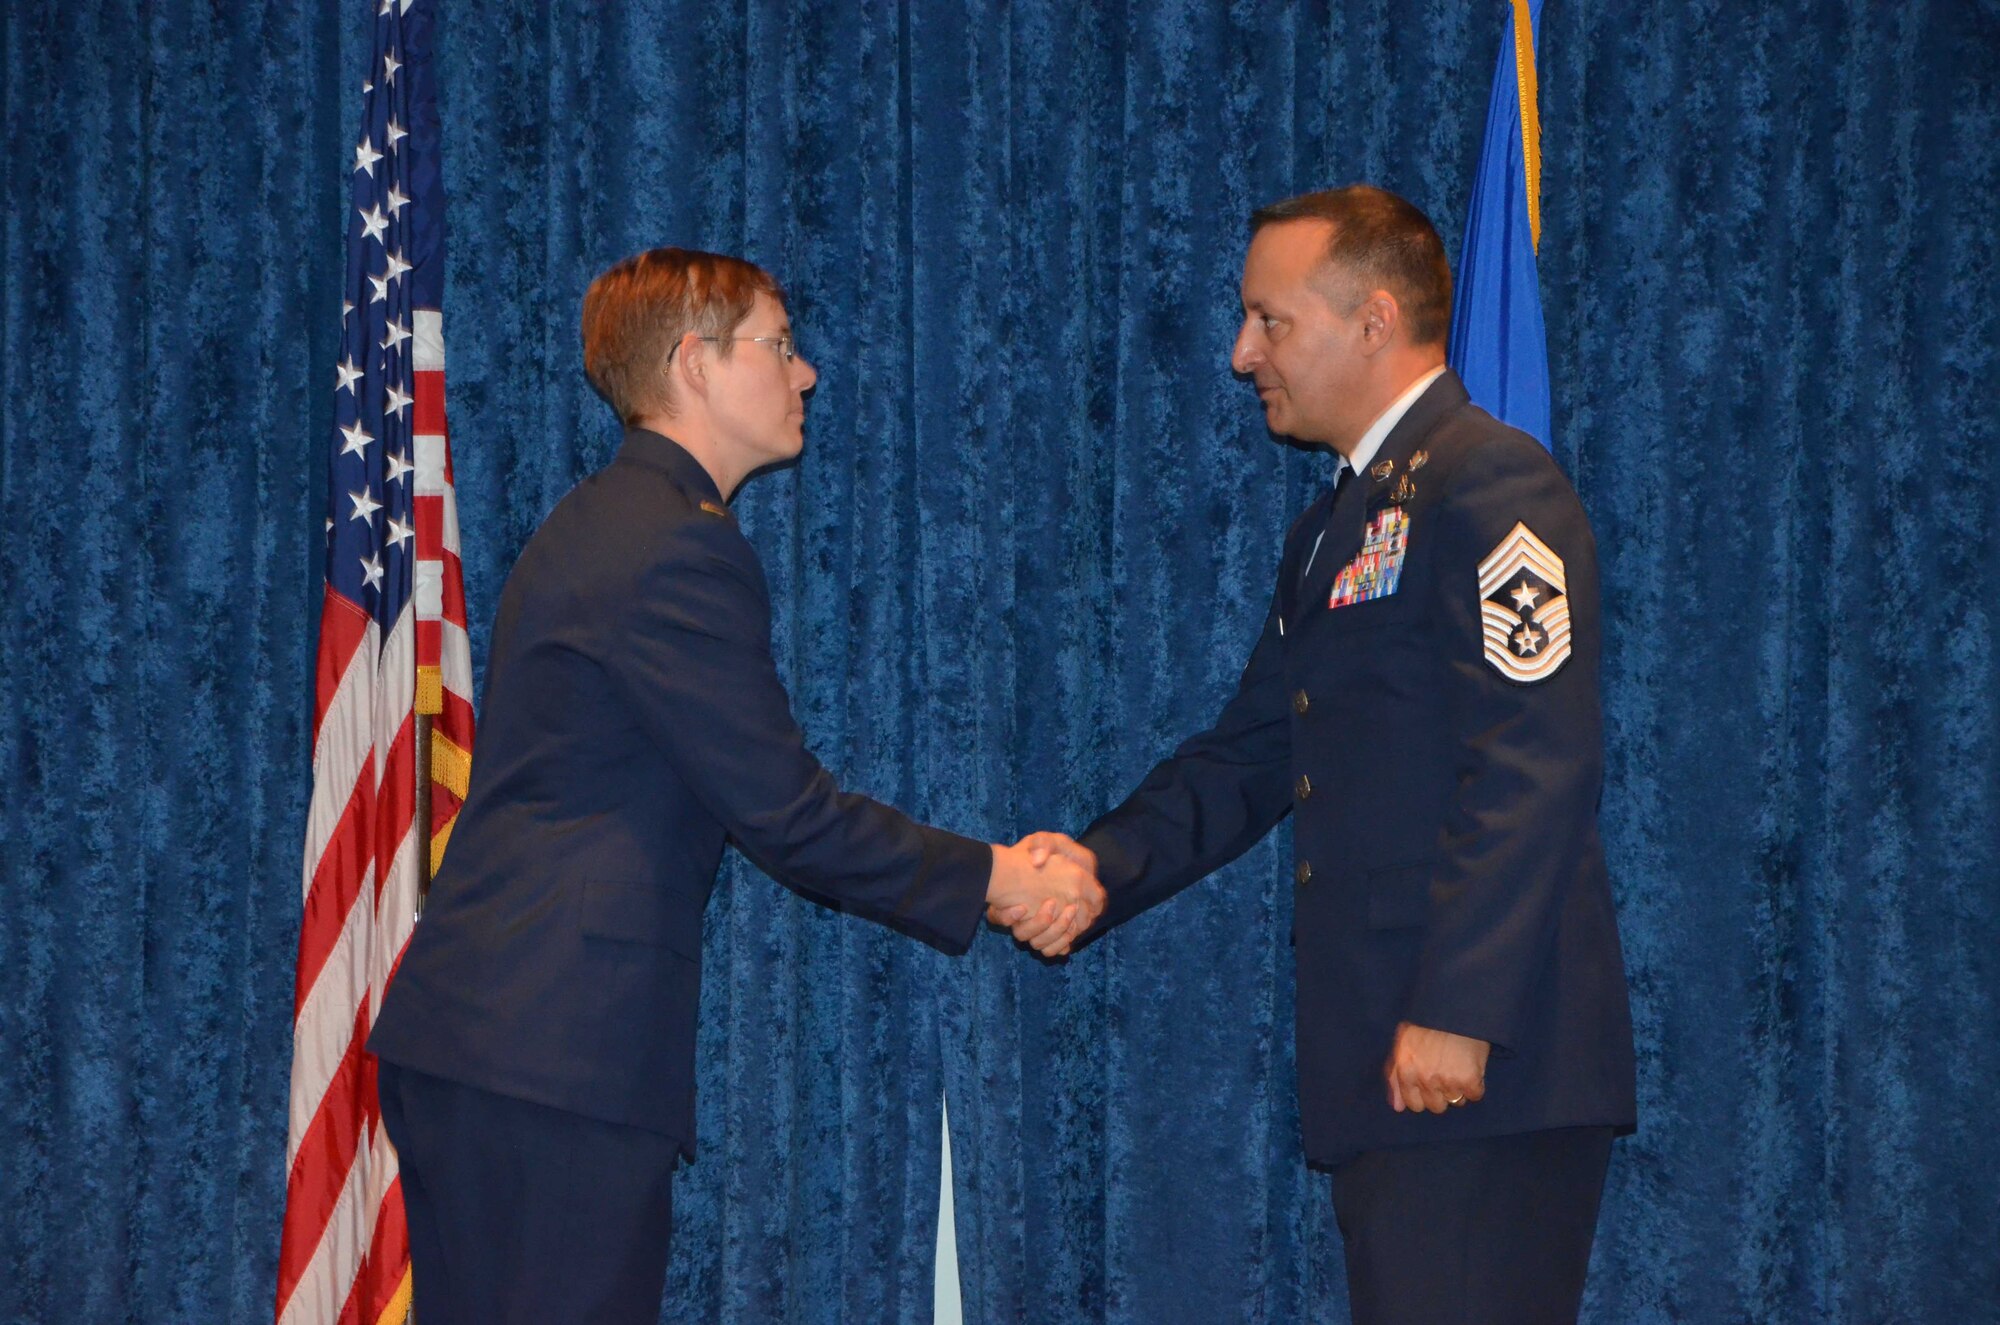 Chief Master Sgt. Michael Joseph, command chief for the Air Force Technical Applications Center at Patrick AFB, Fla., shakes hands with newly-commissioned 2nd Lt. Cynthia A. Schroll, immediately after Schroll presented the chief with a silver dollar after rendering the traditional first salute at Officer Training School May 30, 2019.  (U.S. Air Force photo by Susan A. Romano)